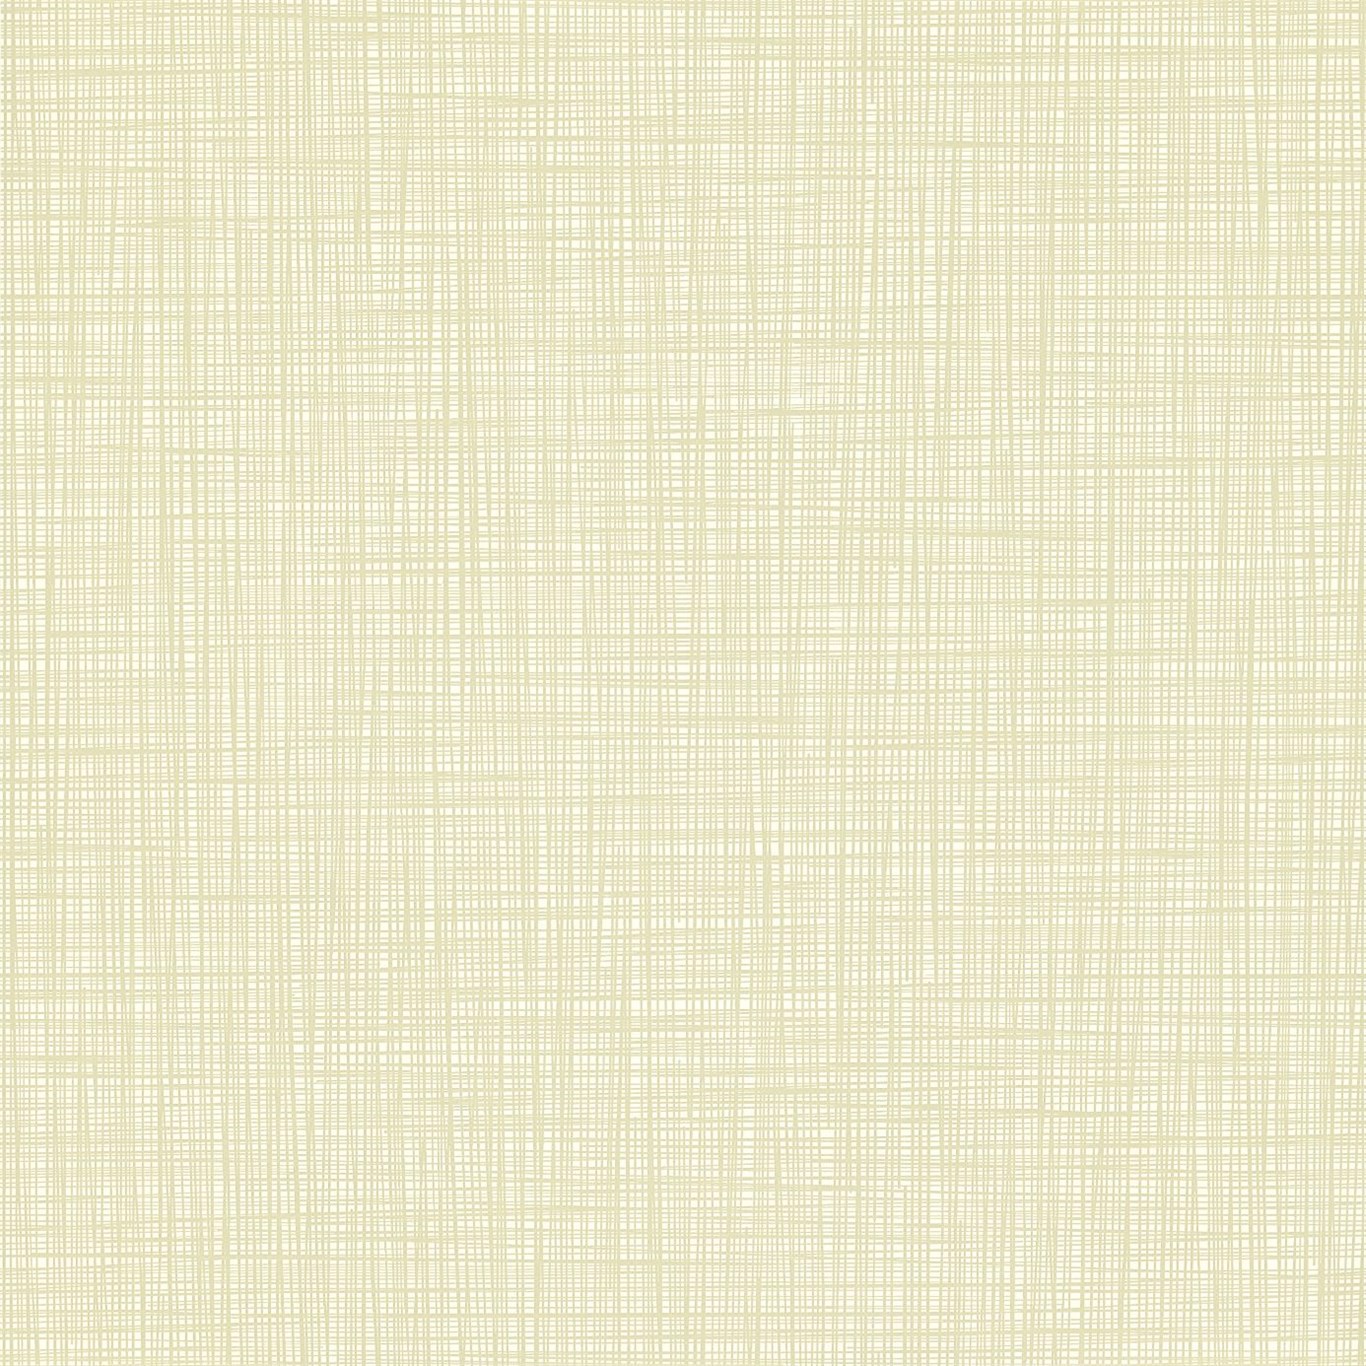 Scribble Calico Wallpaper by HAR